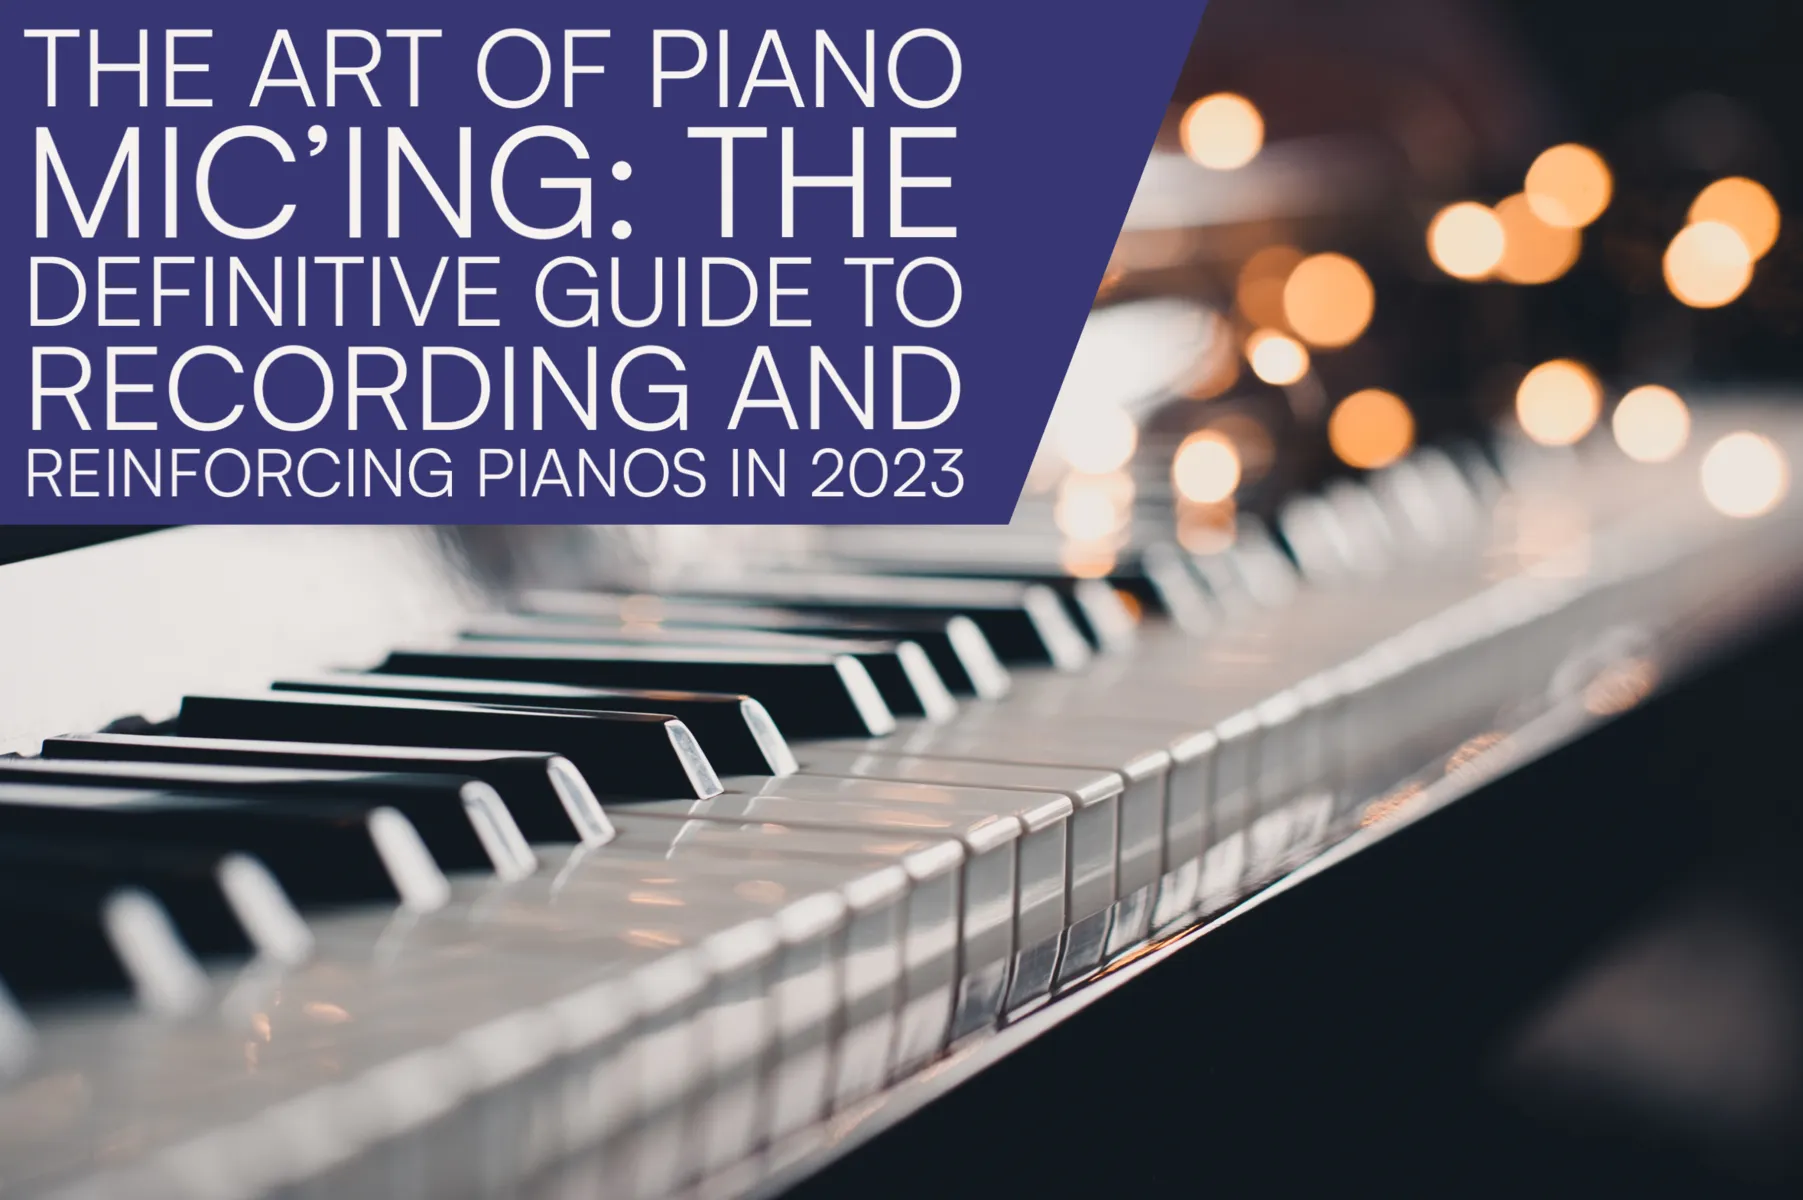 The Art of Piano Mic’ing: The Definitive Guide to Recording and Reinforcing Pianos in 2023